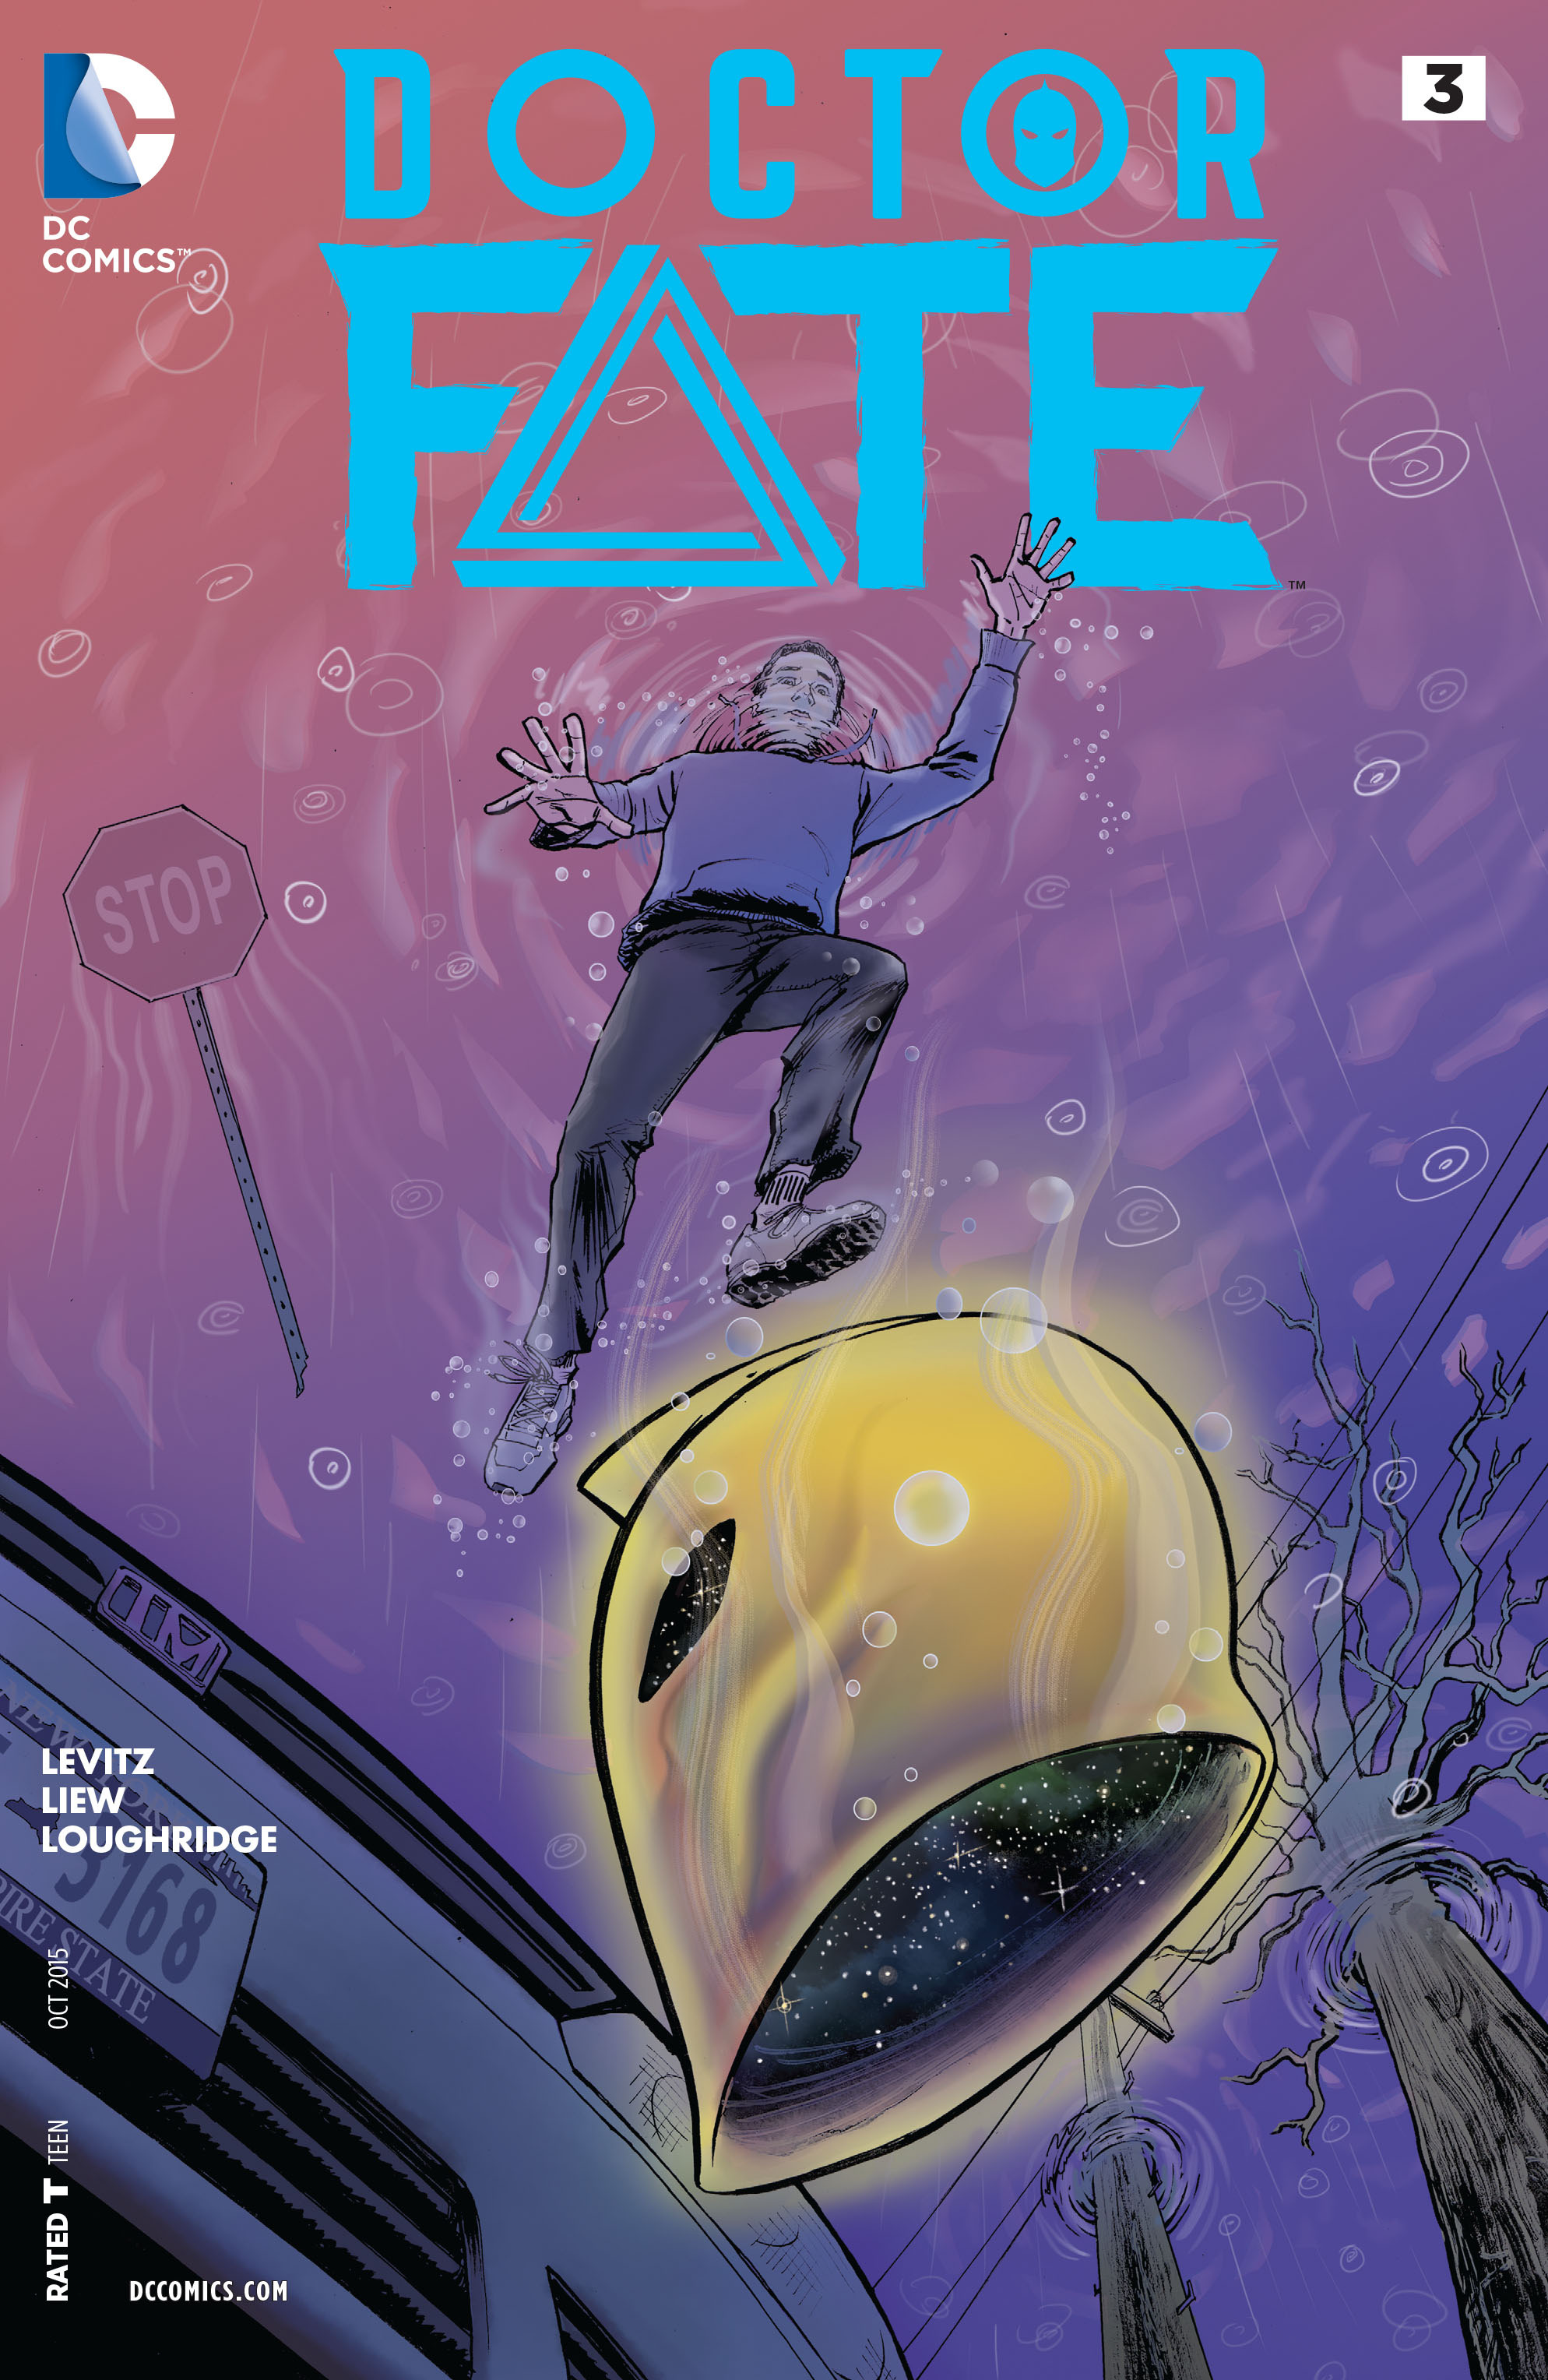 Read online Doctor Fate (2015) comic -  Issue #3 - 3